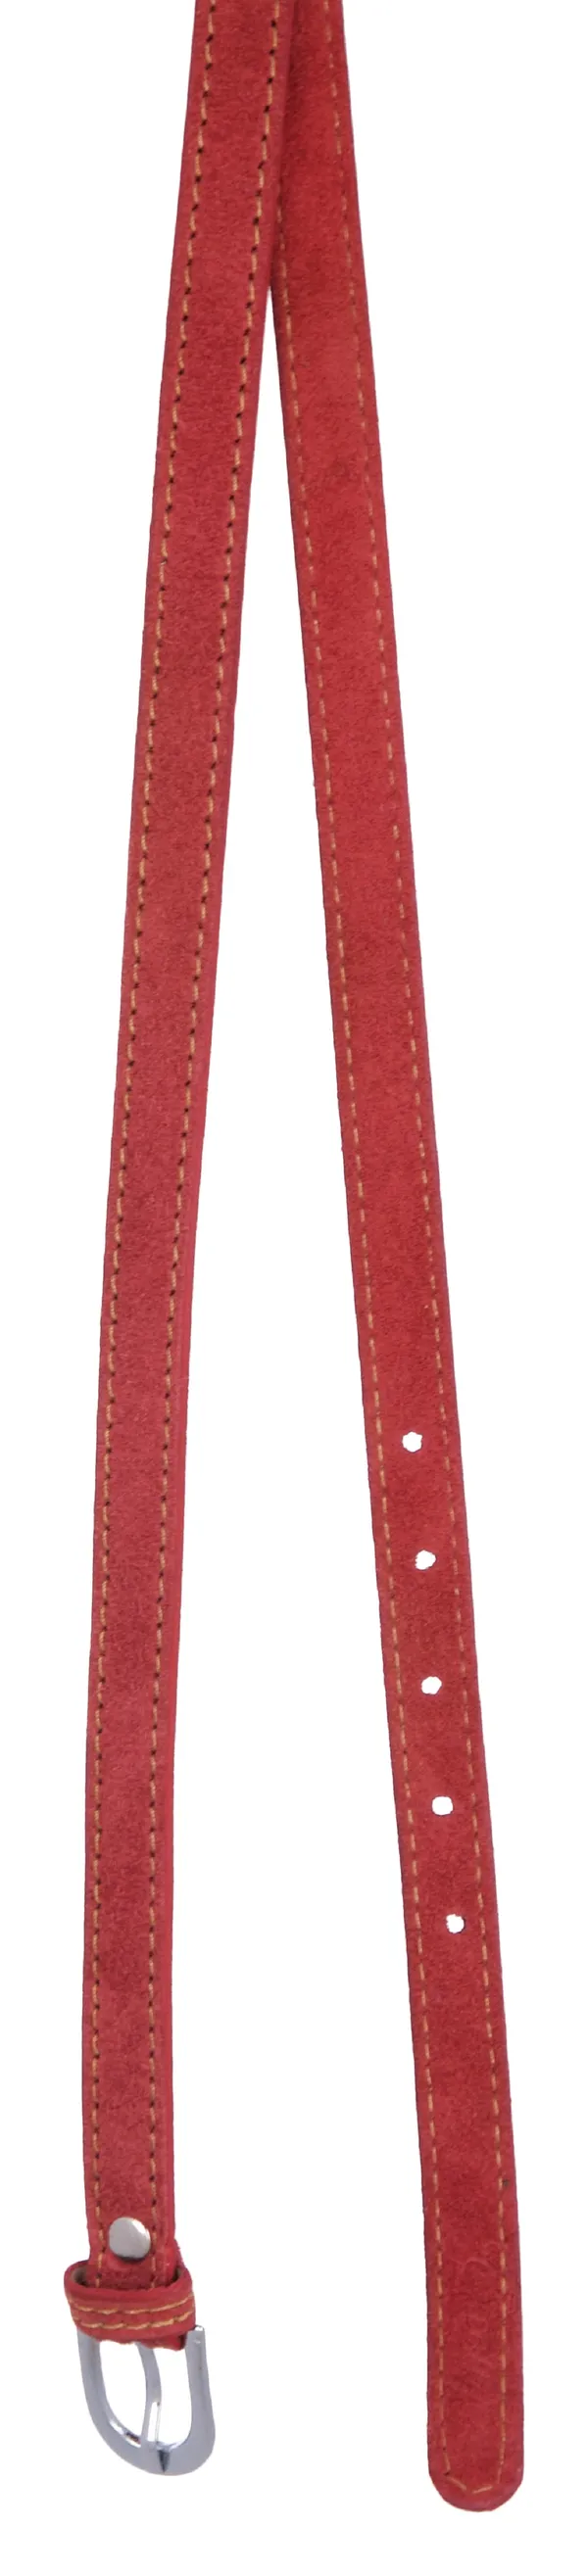 Exotique_Red_Casual_Leather_Belt_For_Women_(BW0012RD)__Exotique